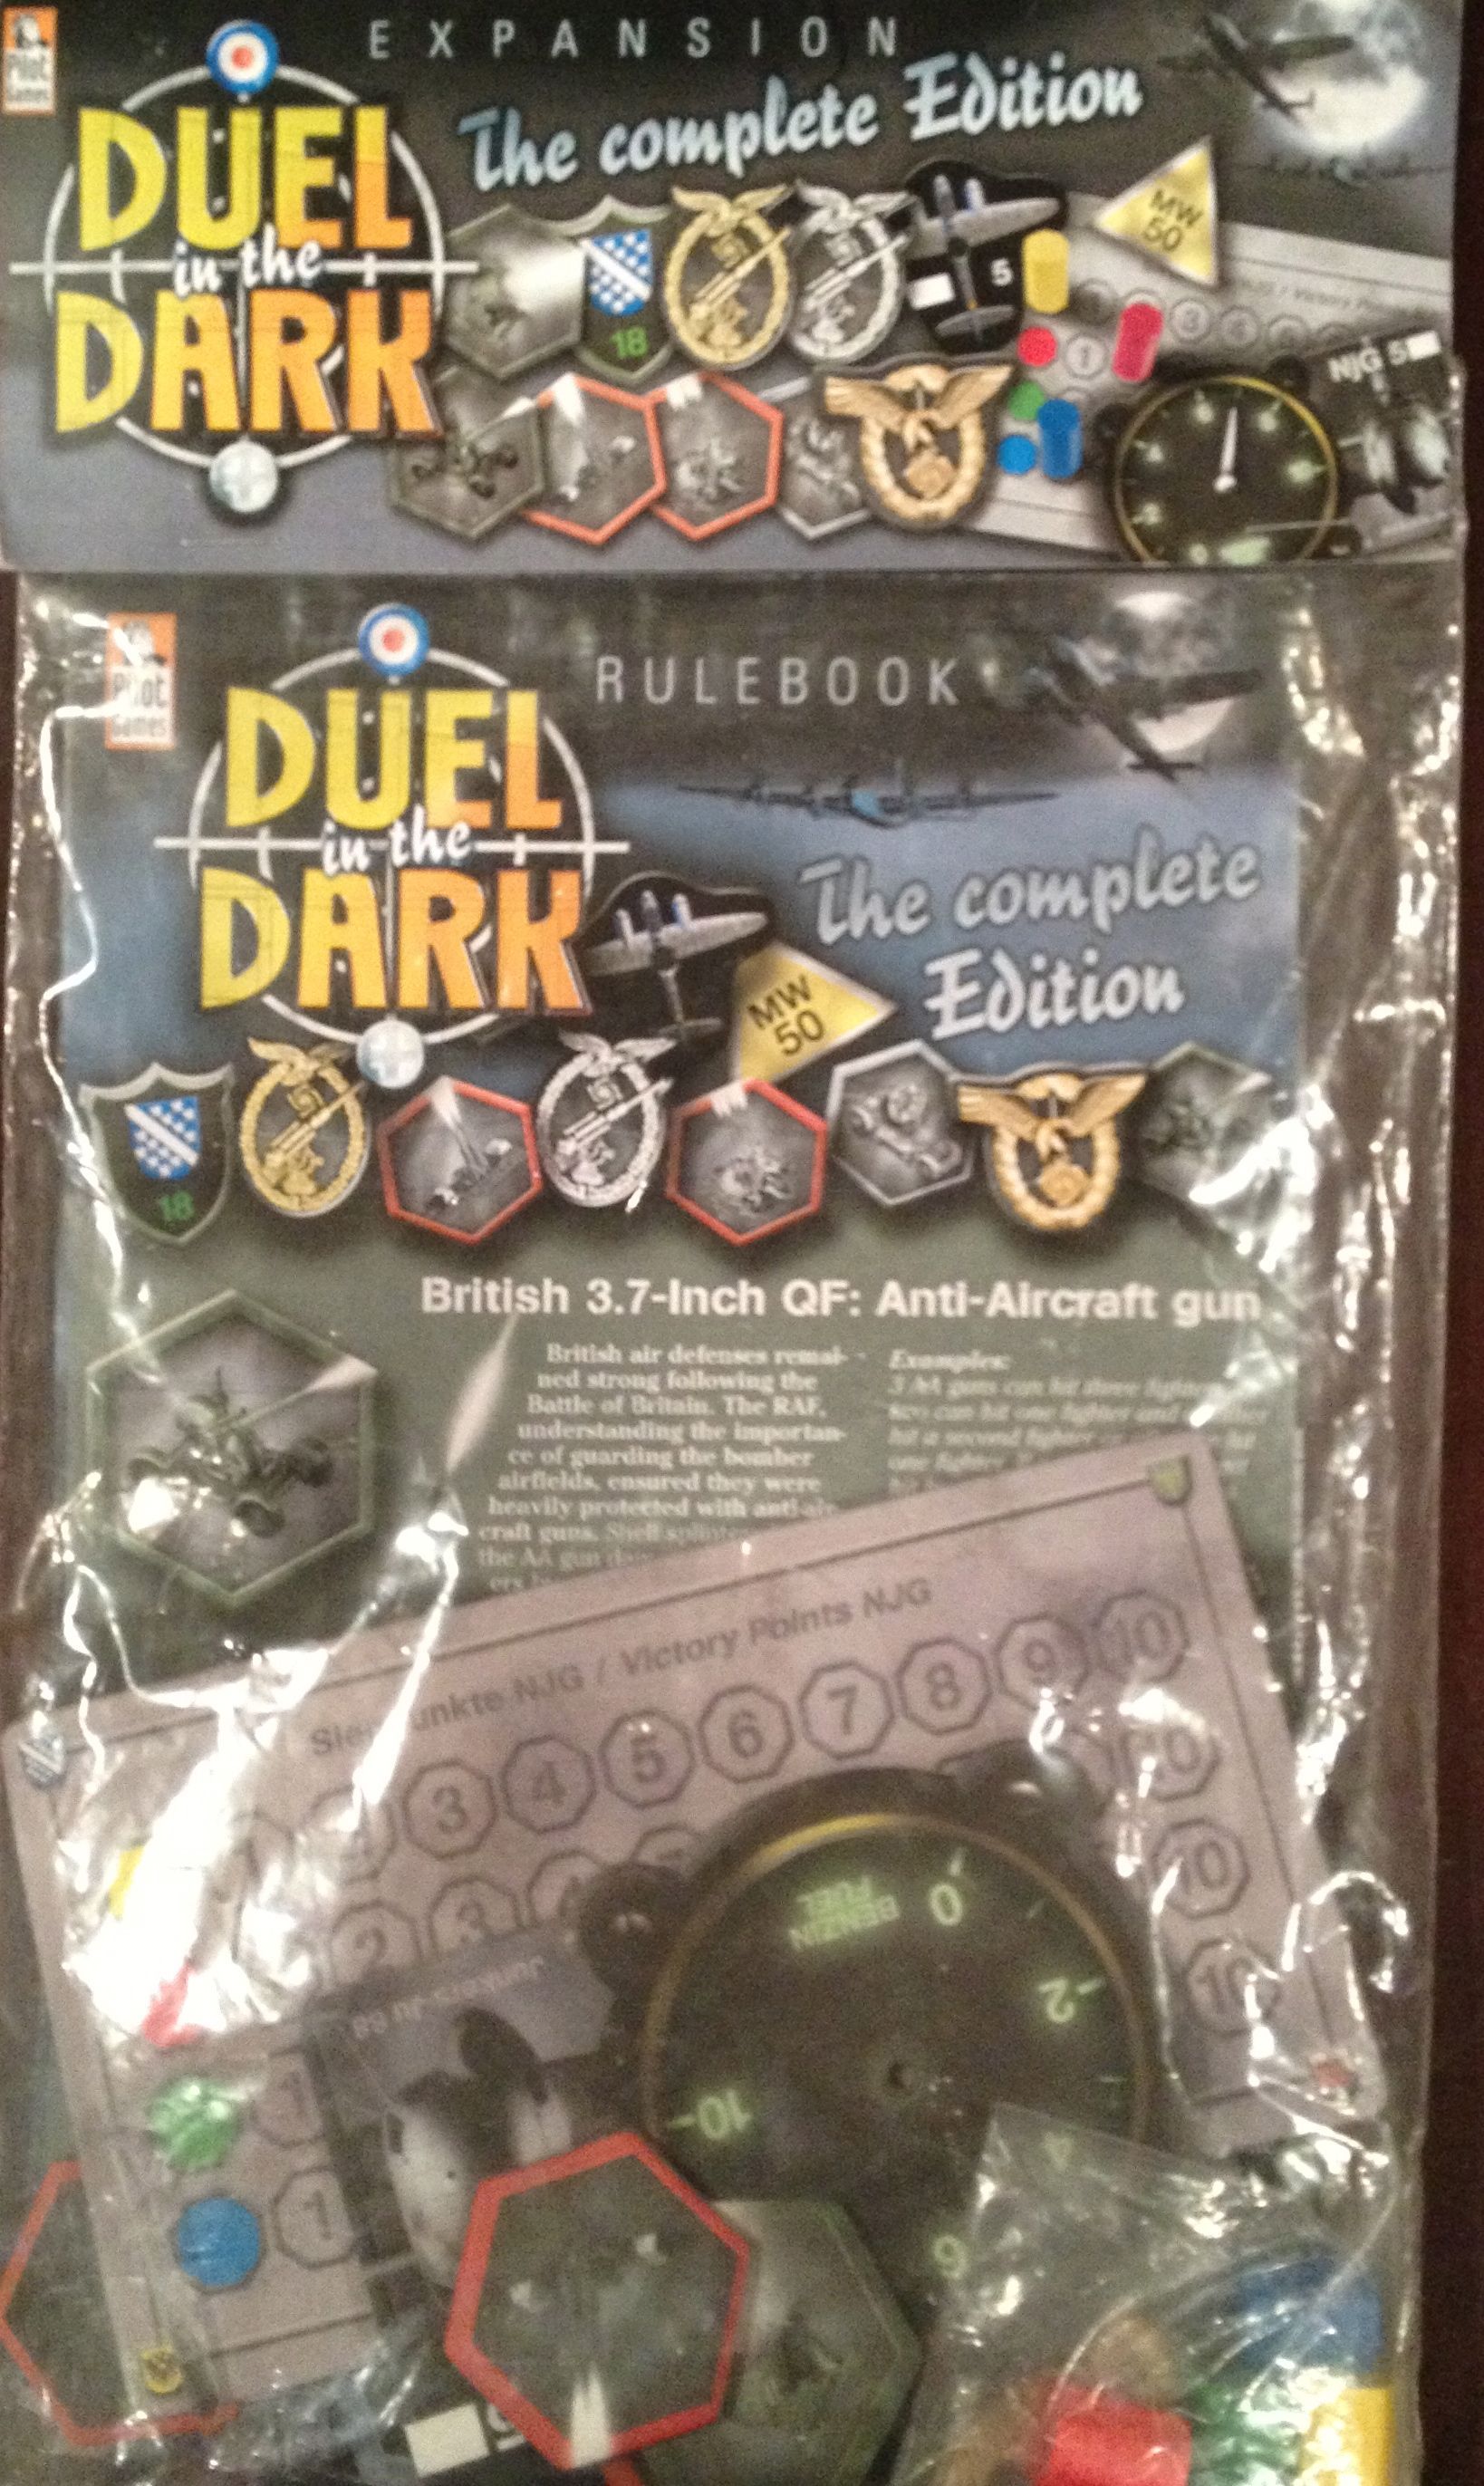 Duel in the Dark: The Complete Edition – Expansion